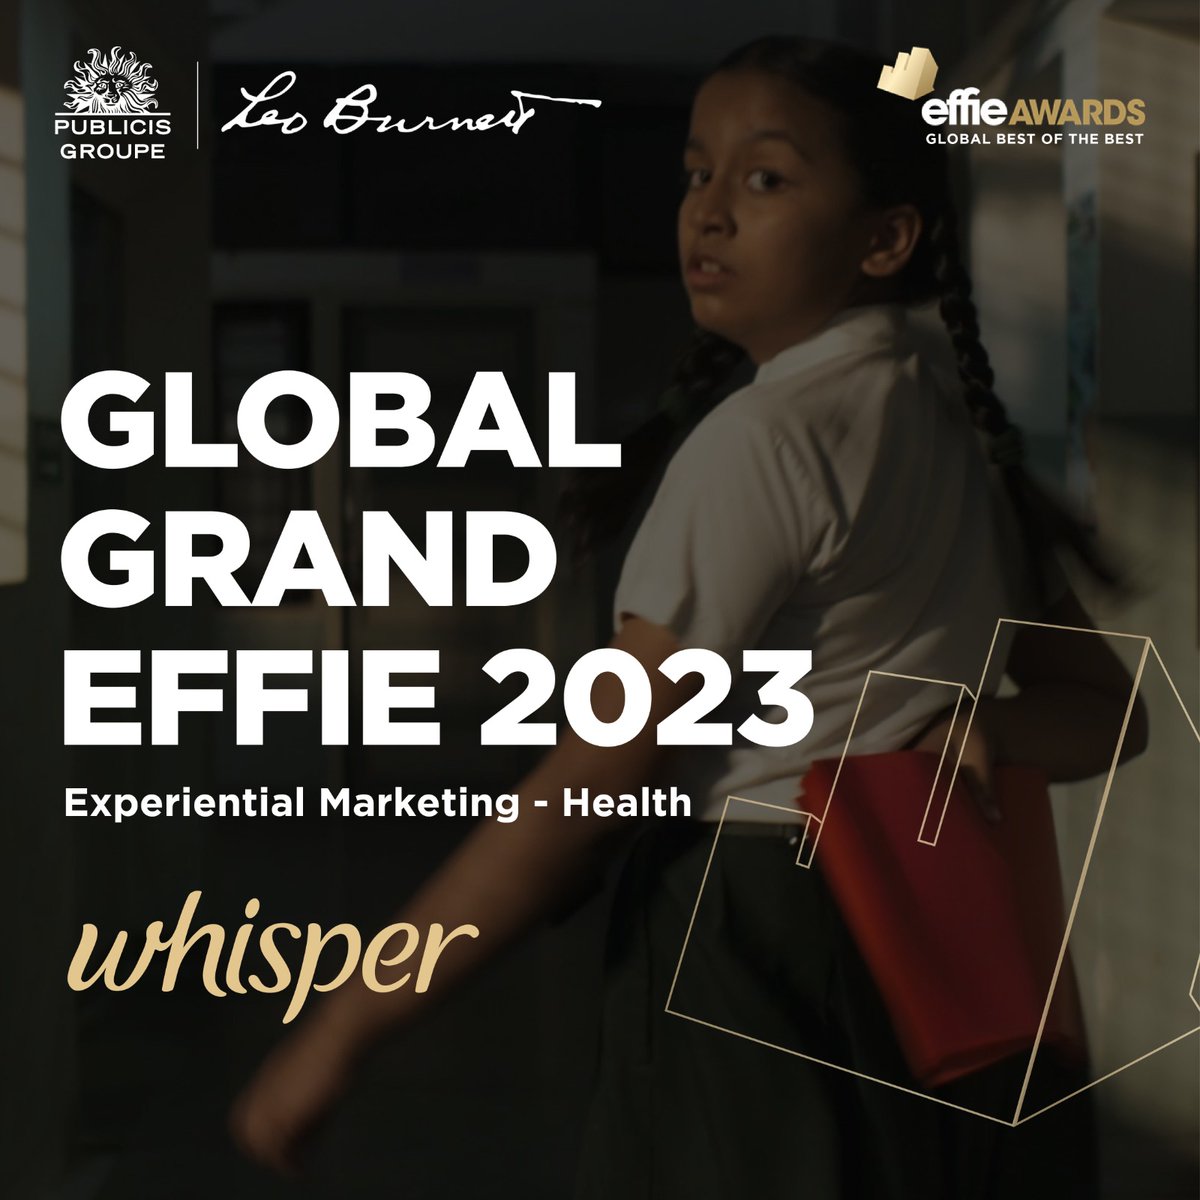 This one's super special!Our campaign for P&G Whisper #MissingChapter was awarded a 'Global Grand Effie' at the Effie Global Awards which recognises the global best of best work. Congratulations to the amazing teams at Leo Burnett and P&G Whisper on this incredible win 🎉🥂